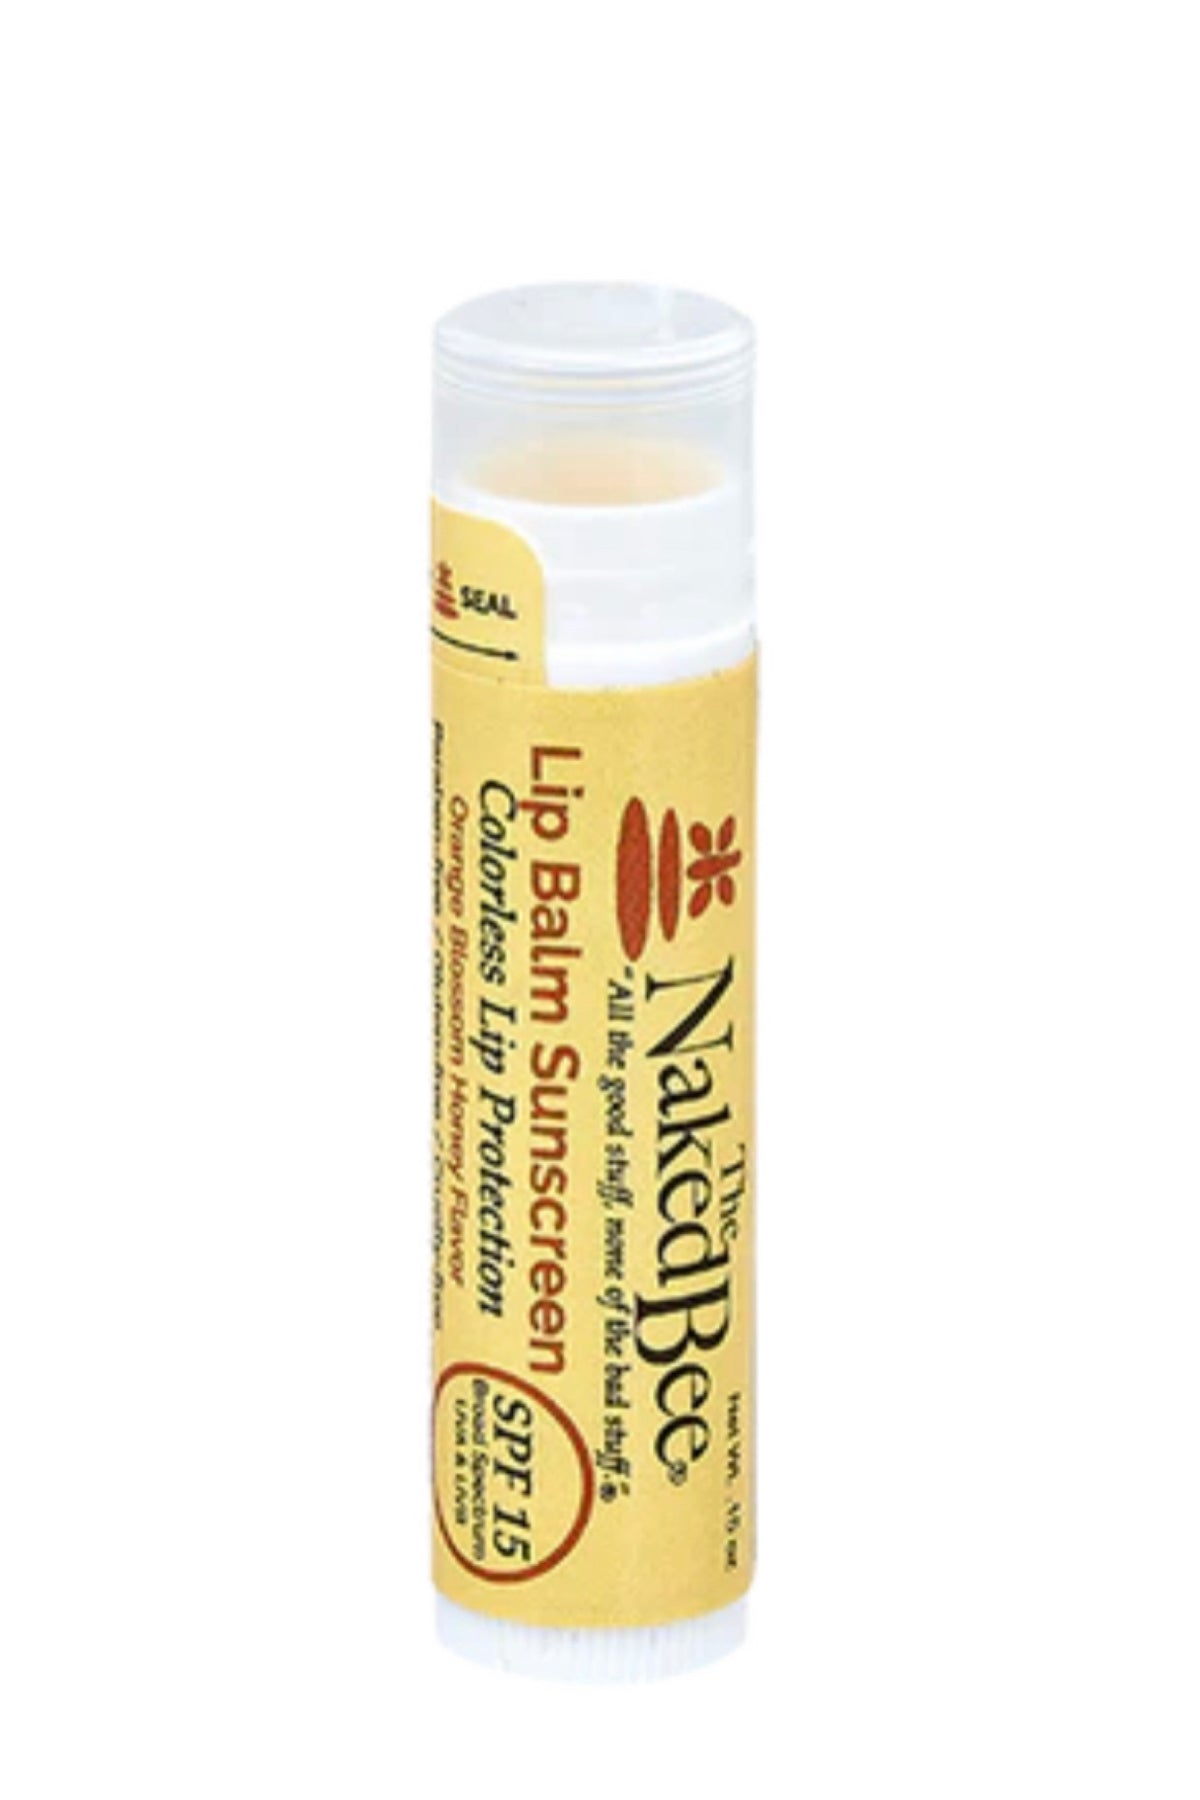 SPF 15 Orange Blossom Honey Colorless Lip Balm by Naked Bee-Gift-Naked Bee-Gallop 'n Glitz- Women's Western Wear Boutique, Located in Grants Pass, Oregon